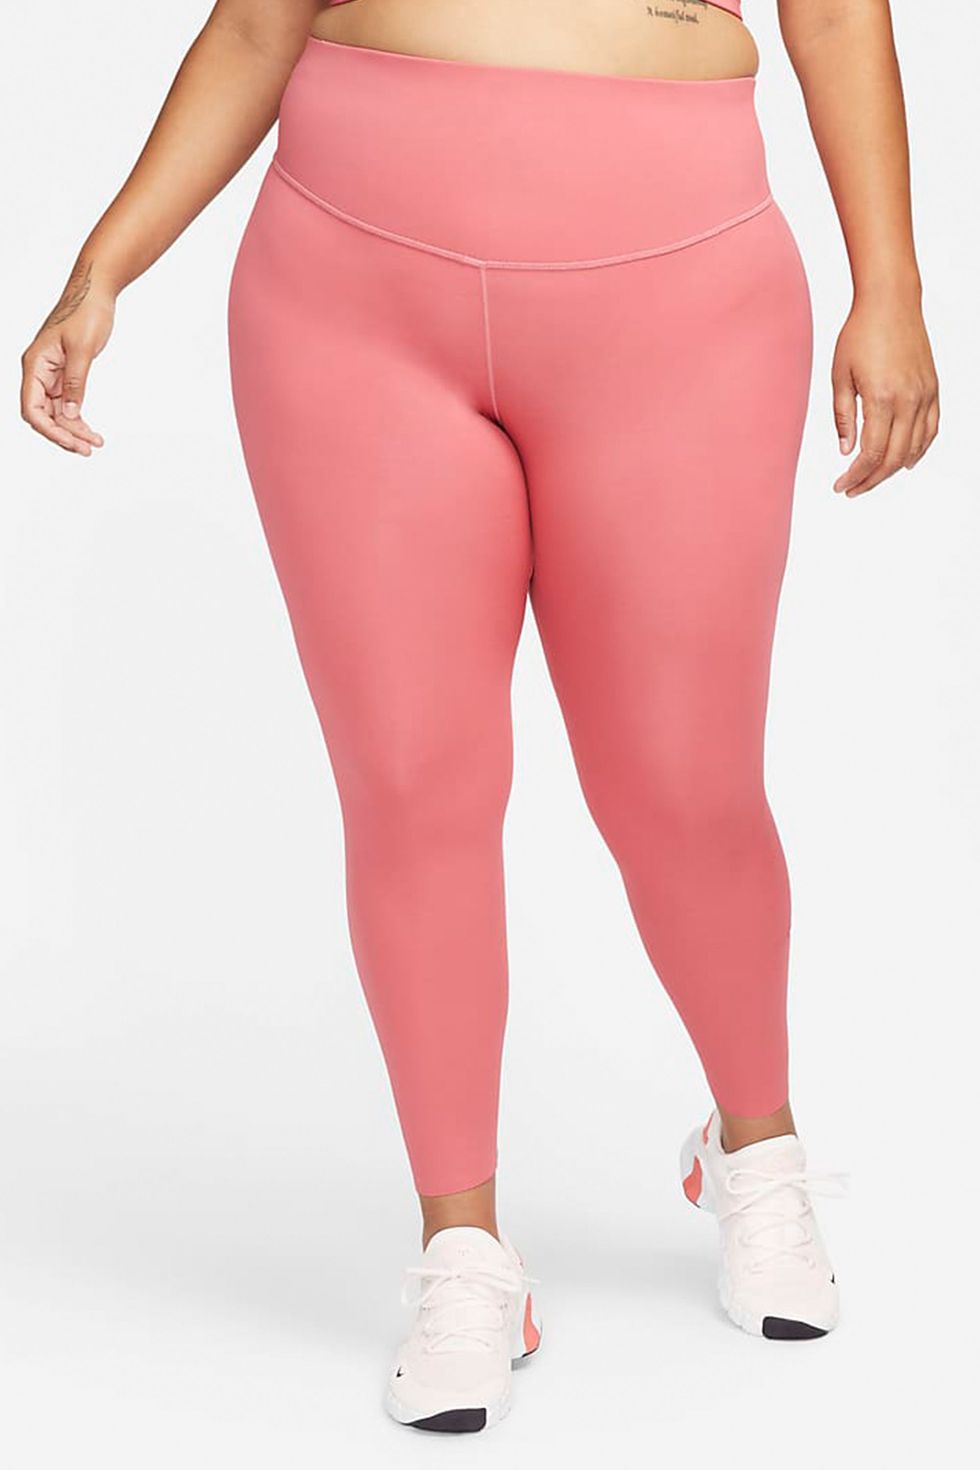 Buy RBX Active Women's Super Soft Peached Space Dye Full Length Workout  Running Yoga Legging, 7/8 Light Pink, Small at